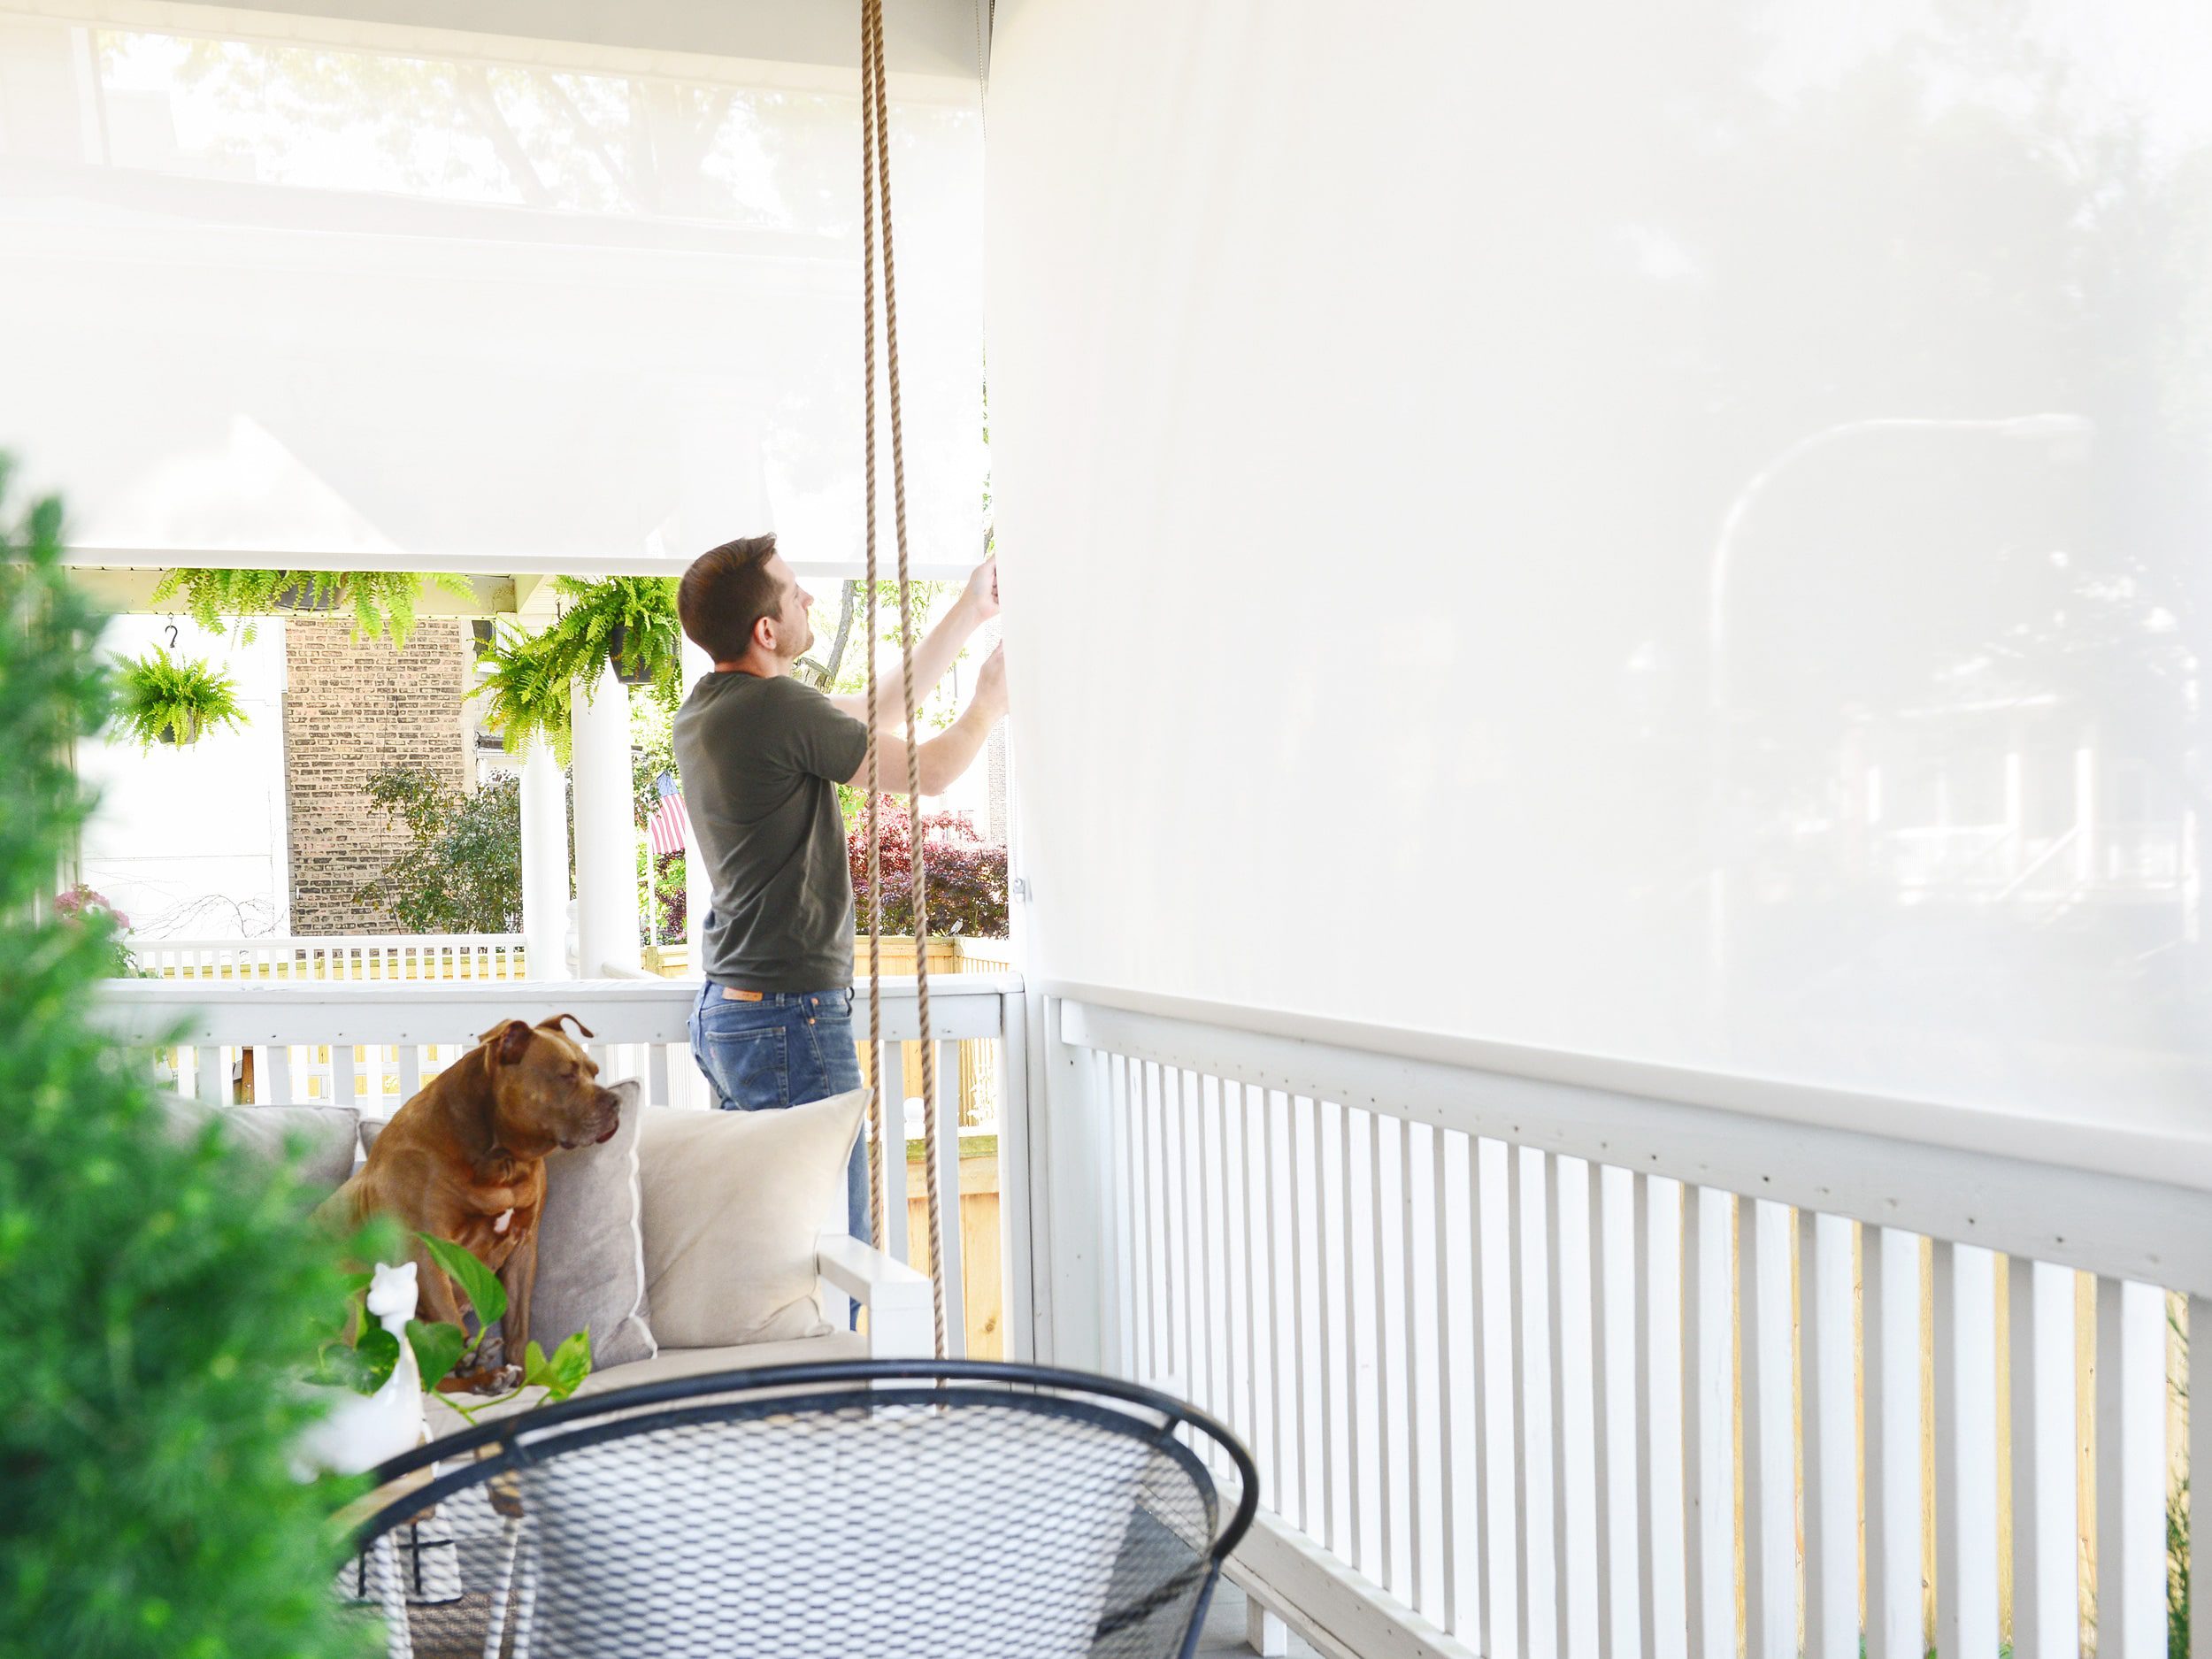 How we installed solar shades on our urban front porch. Via Yellow Brick Home